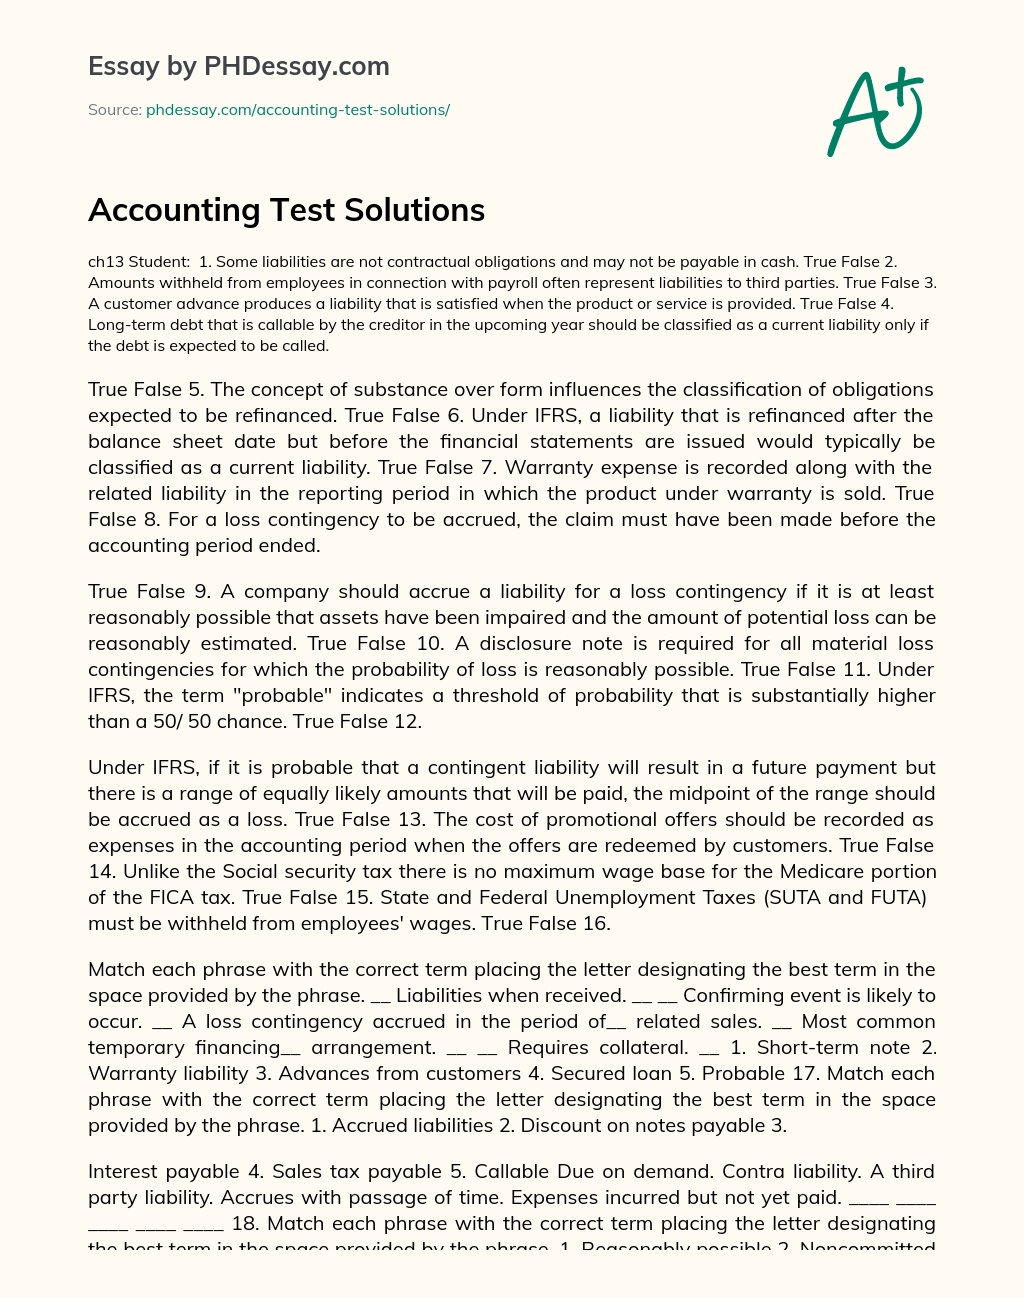 Accounting Test Solutions essay